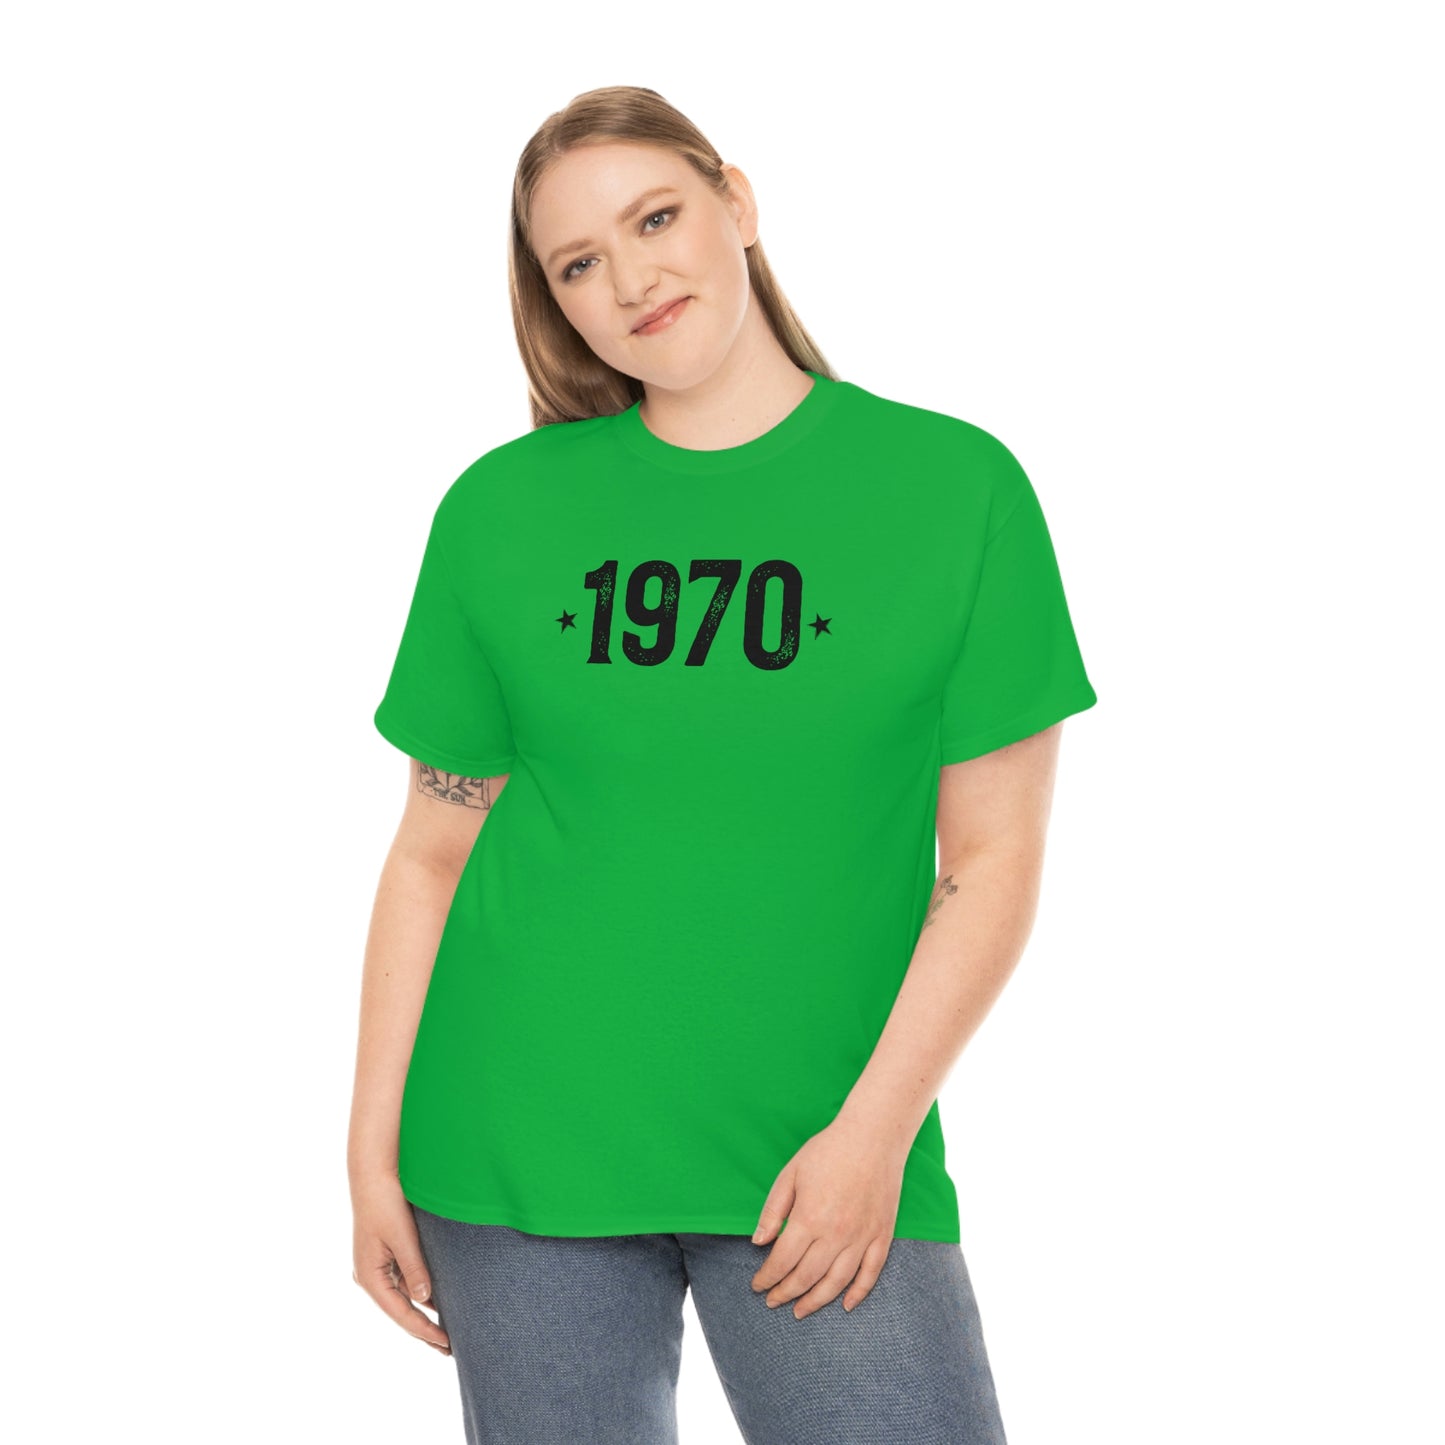 "1970" T-Shirt - Weave Got Gifts - Unique Gifts You Won’t Find Anywhere Else!